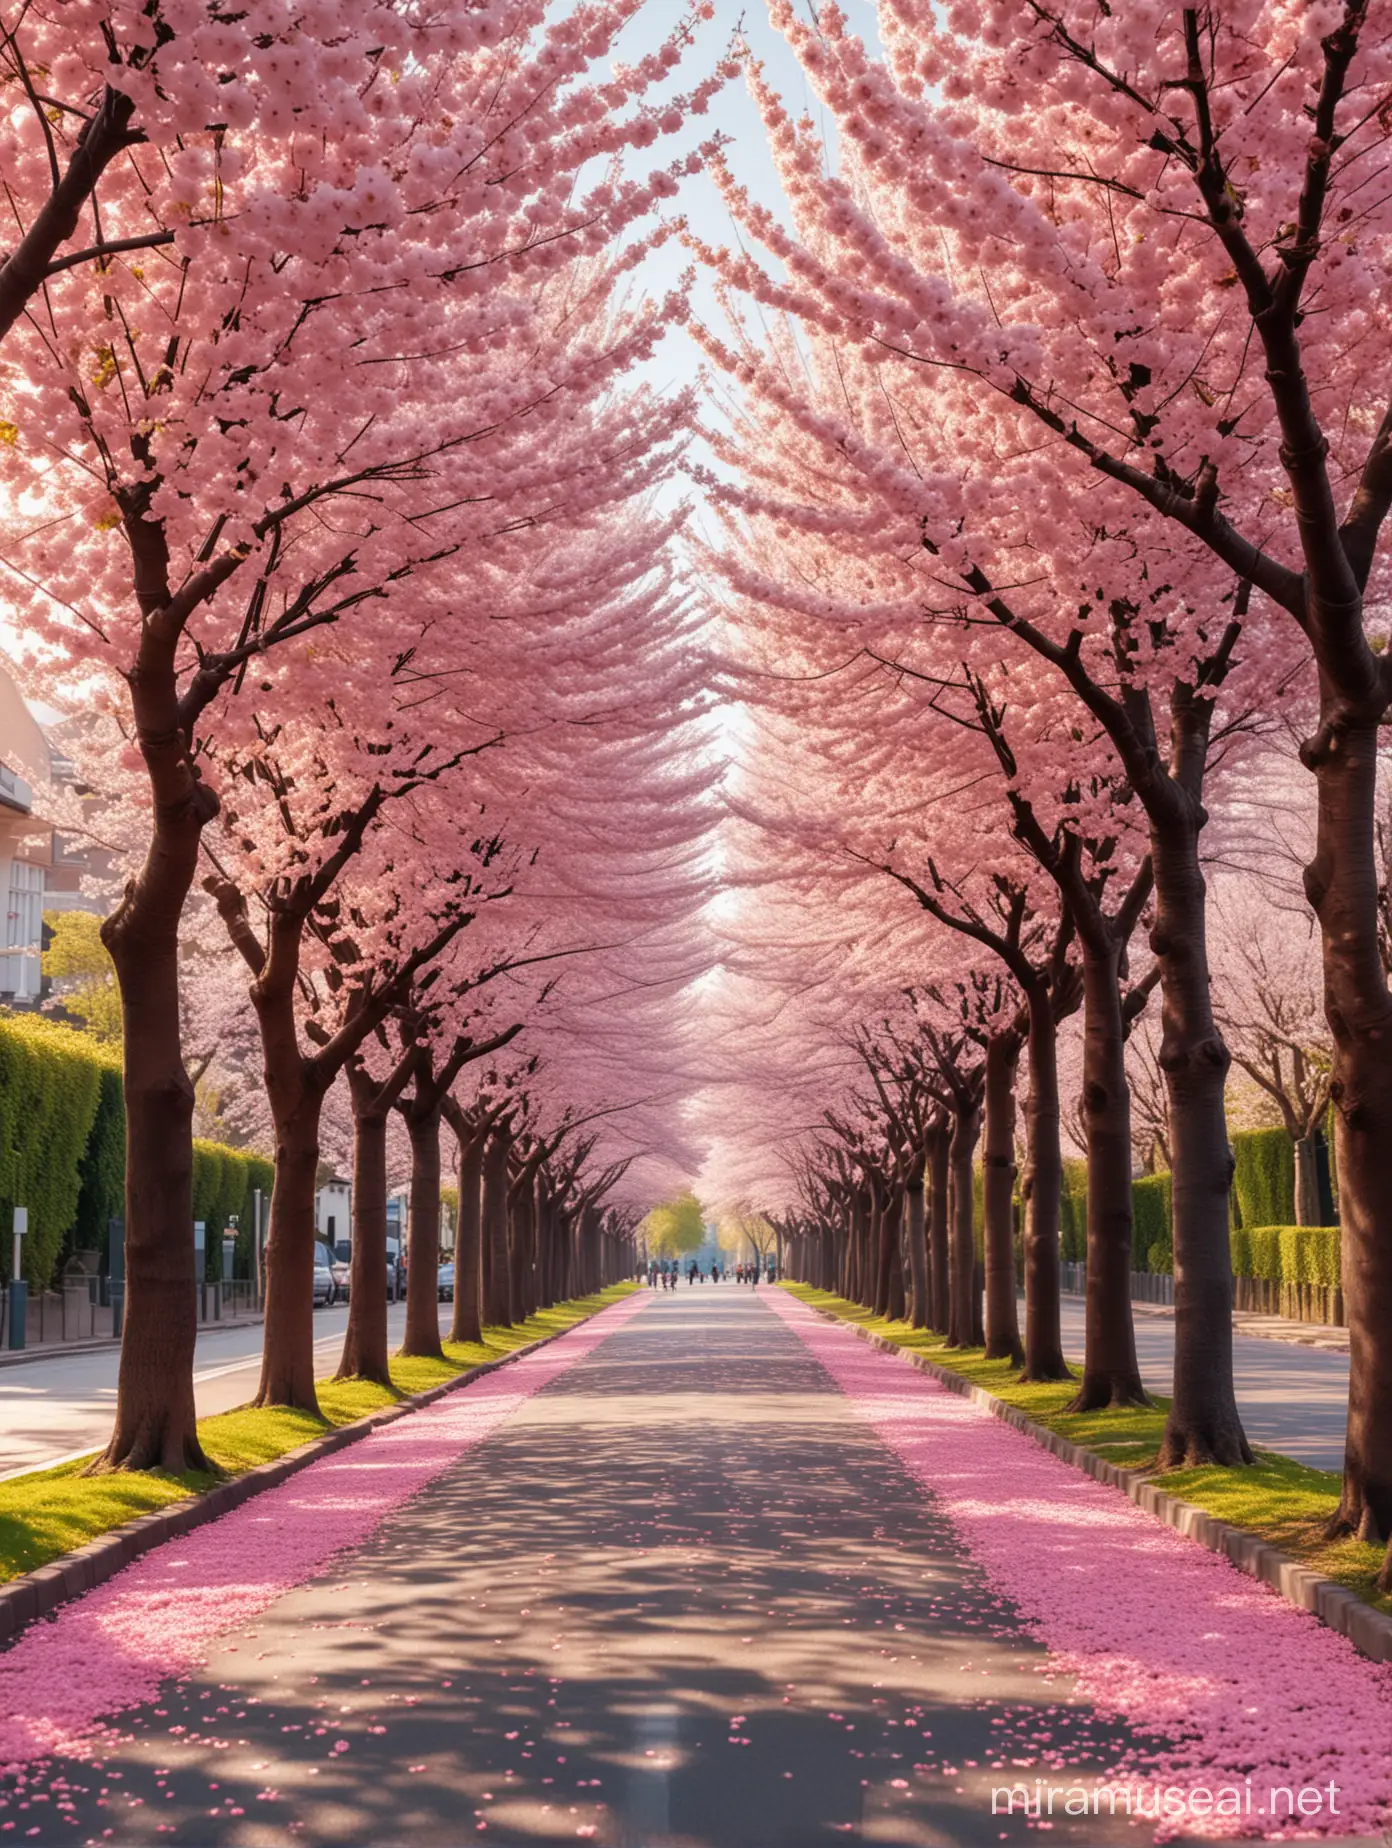 A breathtakingly beautiful real-life photograph of a curved street lined with fully bloomed cherry blossom trees, street is covered with cherry blossom petals, sunlight filtering through the petals creating a serene and magical atmosphere, masterpiece,best quality, highres, 8K photograph, Nikon